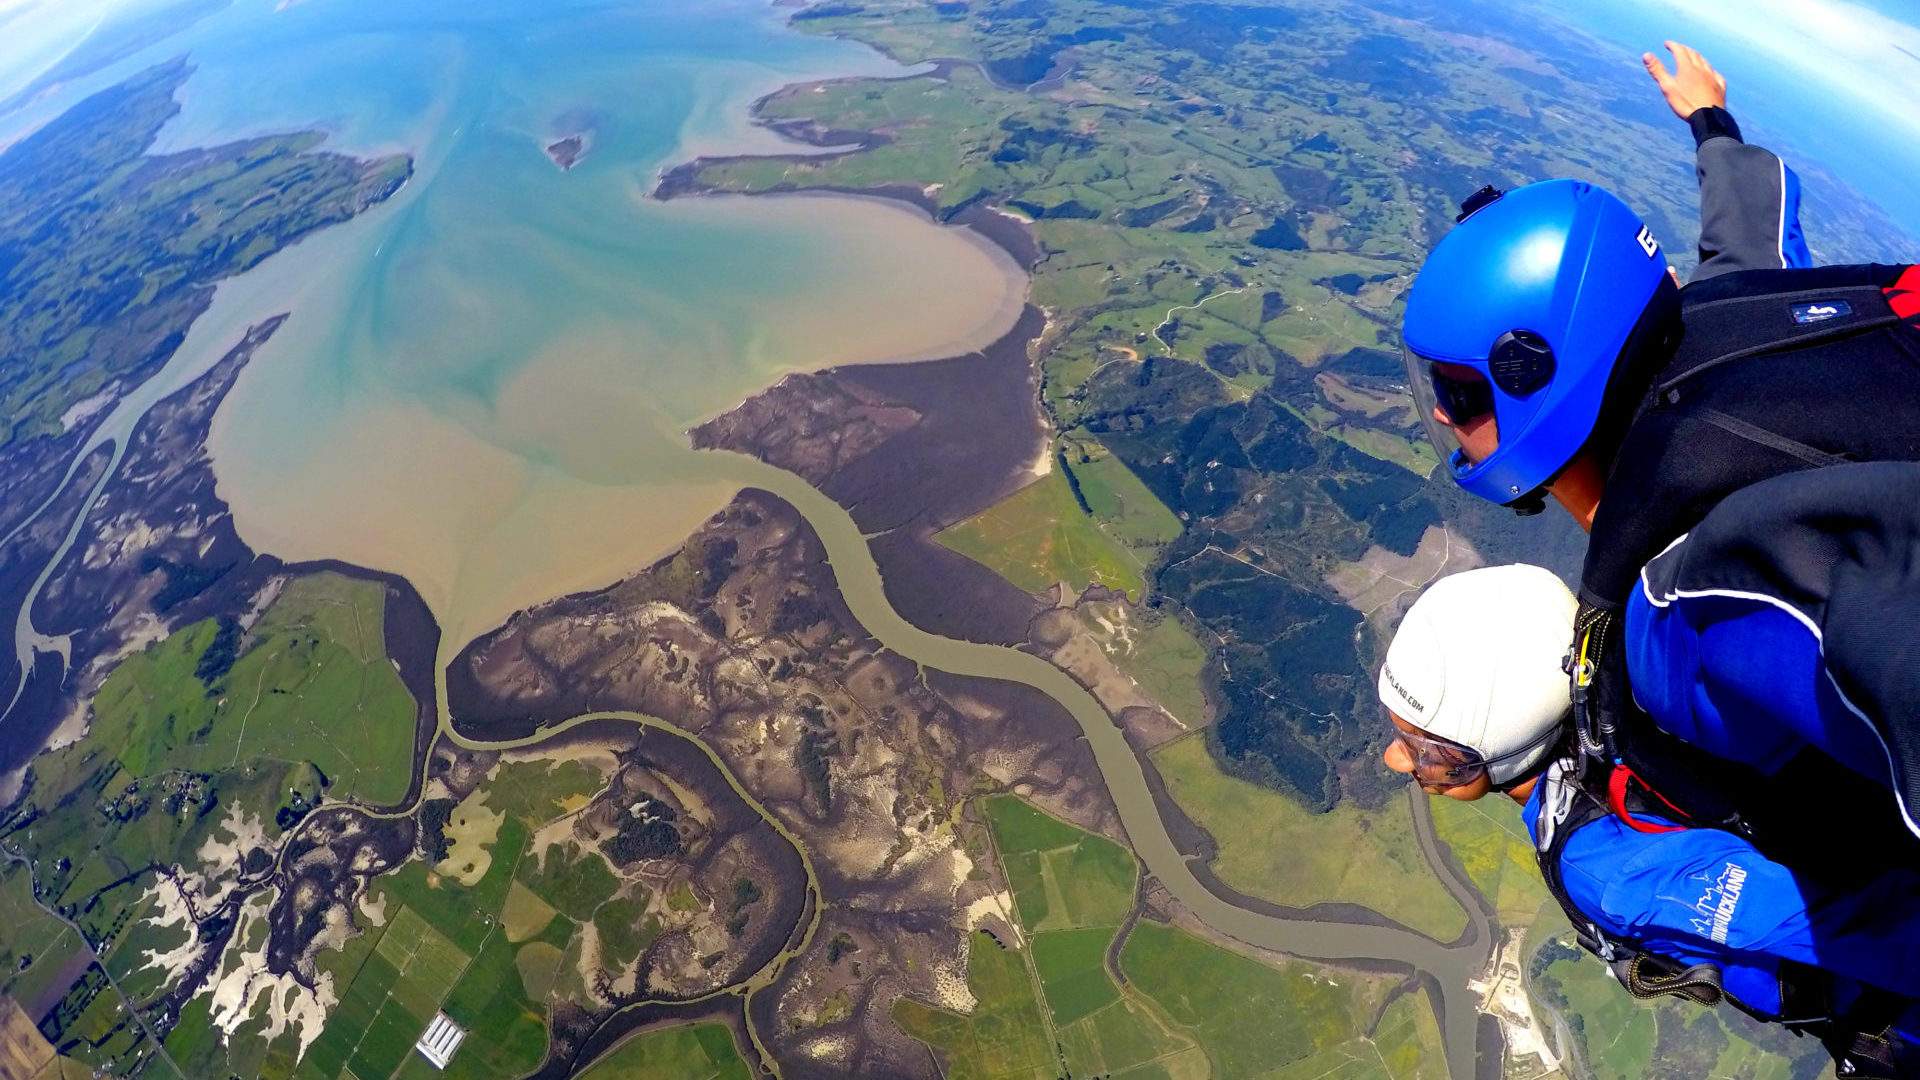 Auckland Is Now Home to New Zealand's Highest Tandem Skydive